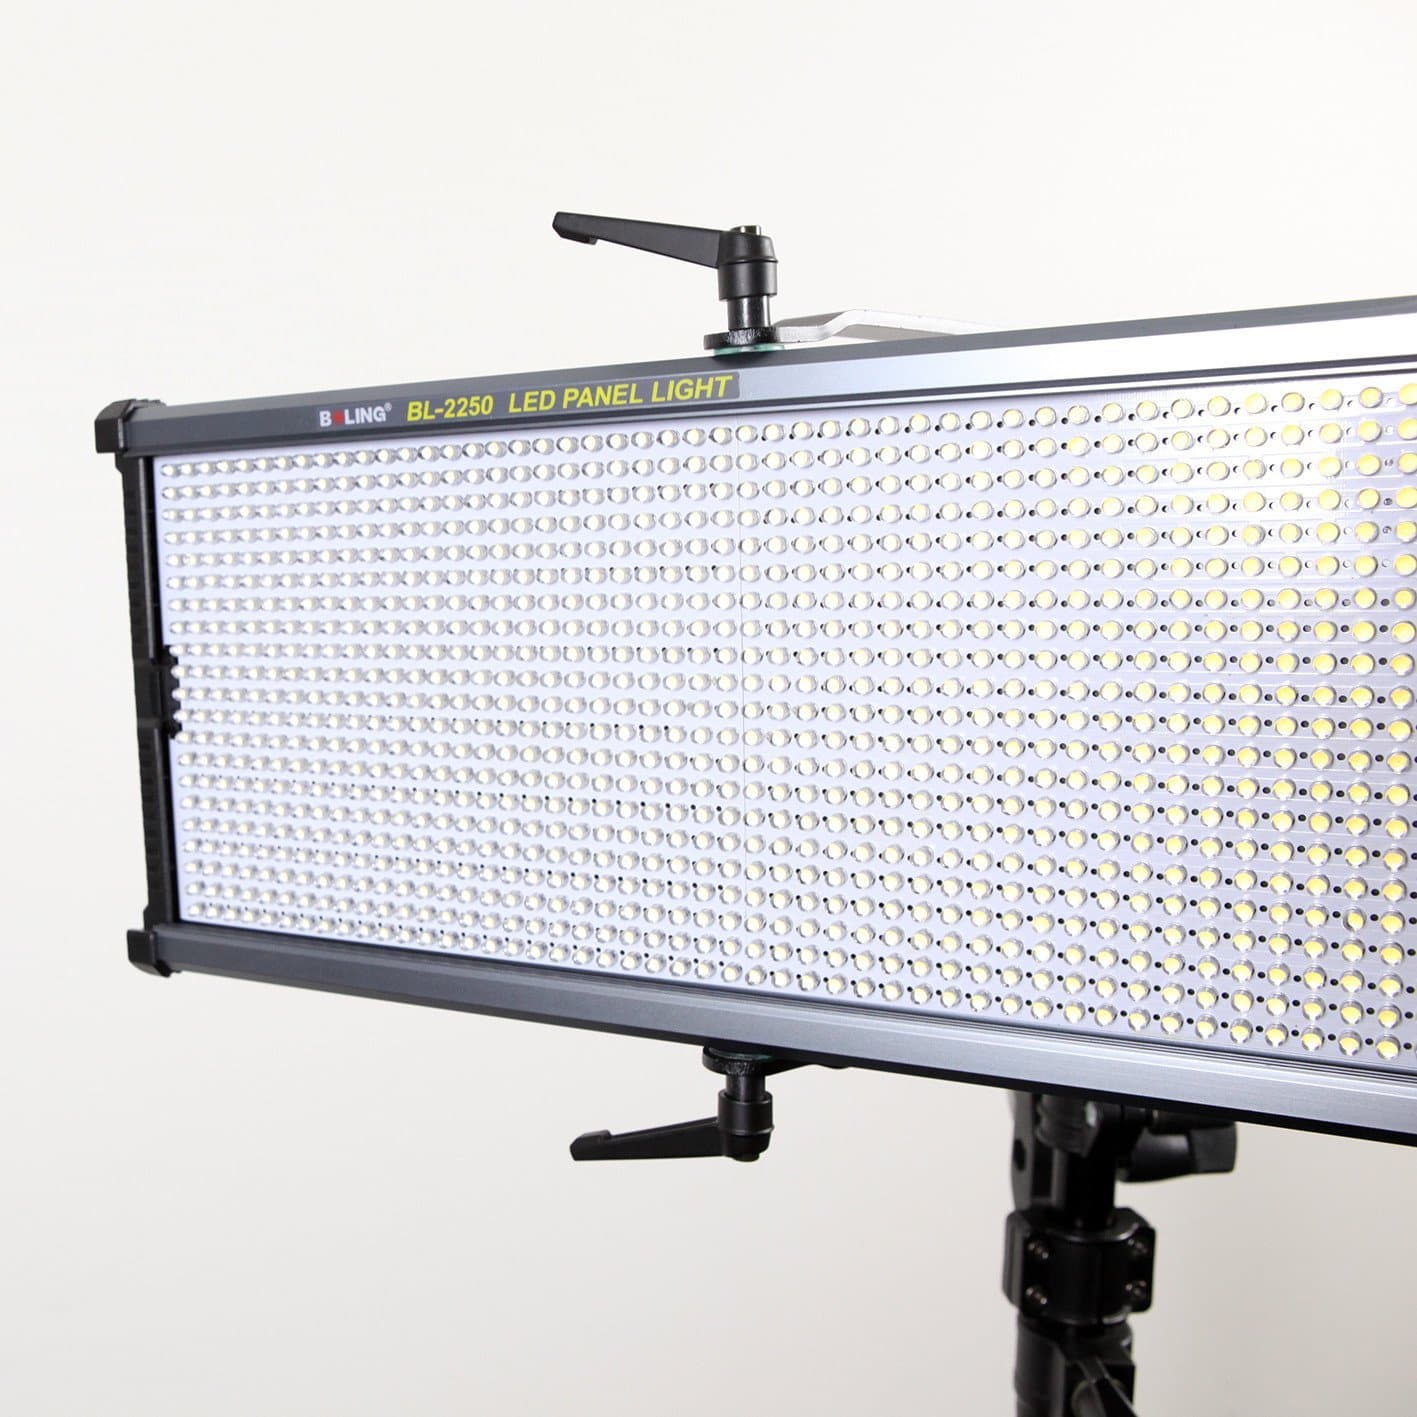 Boling 3x 2250P LED Video & Photography Continuous Portable Lighting Kit (21,100 Lumens at 1M)